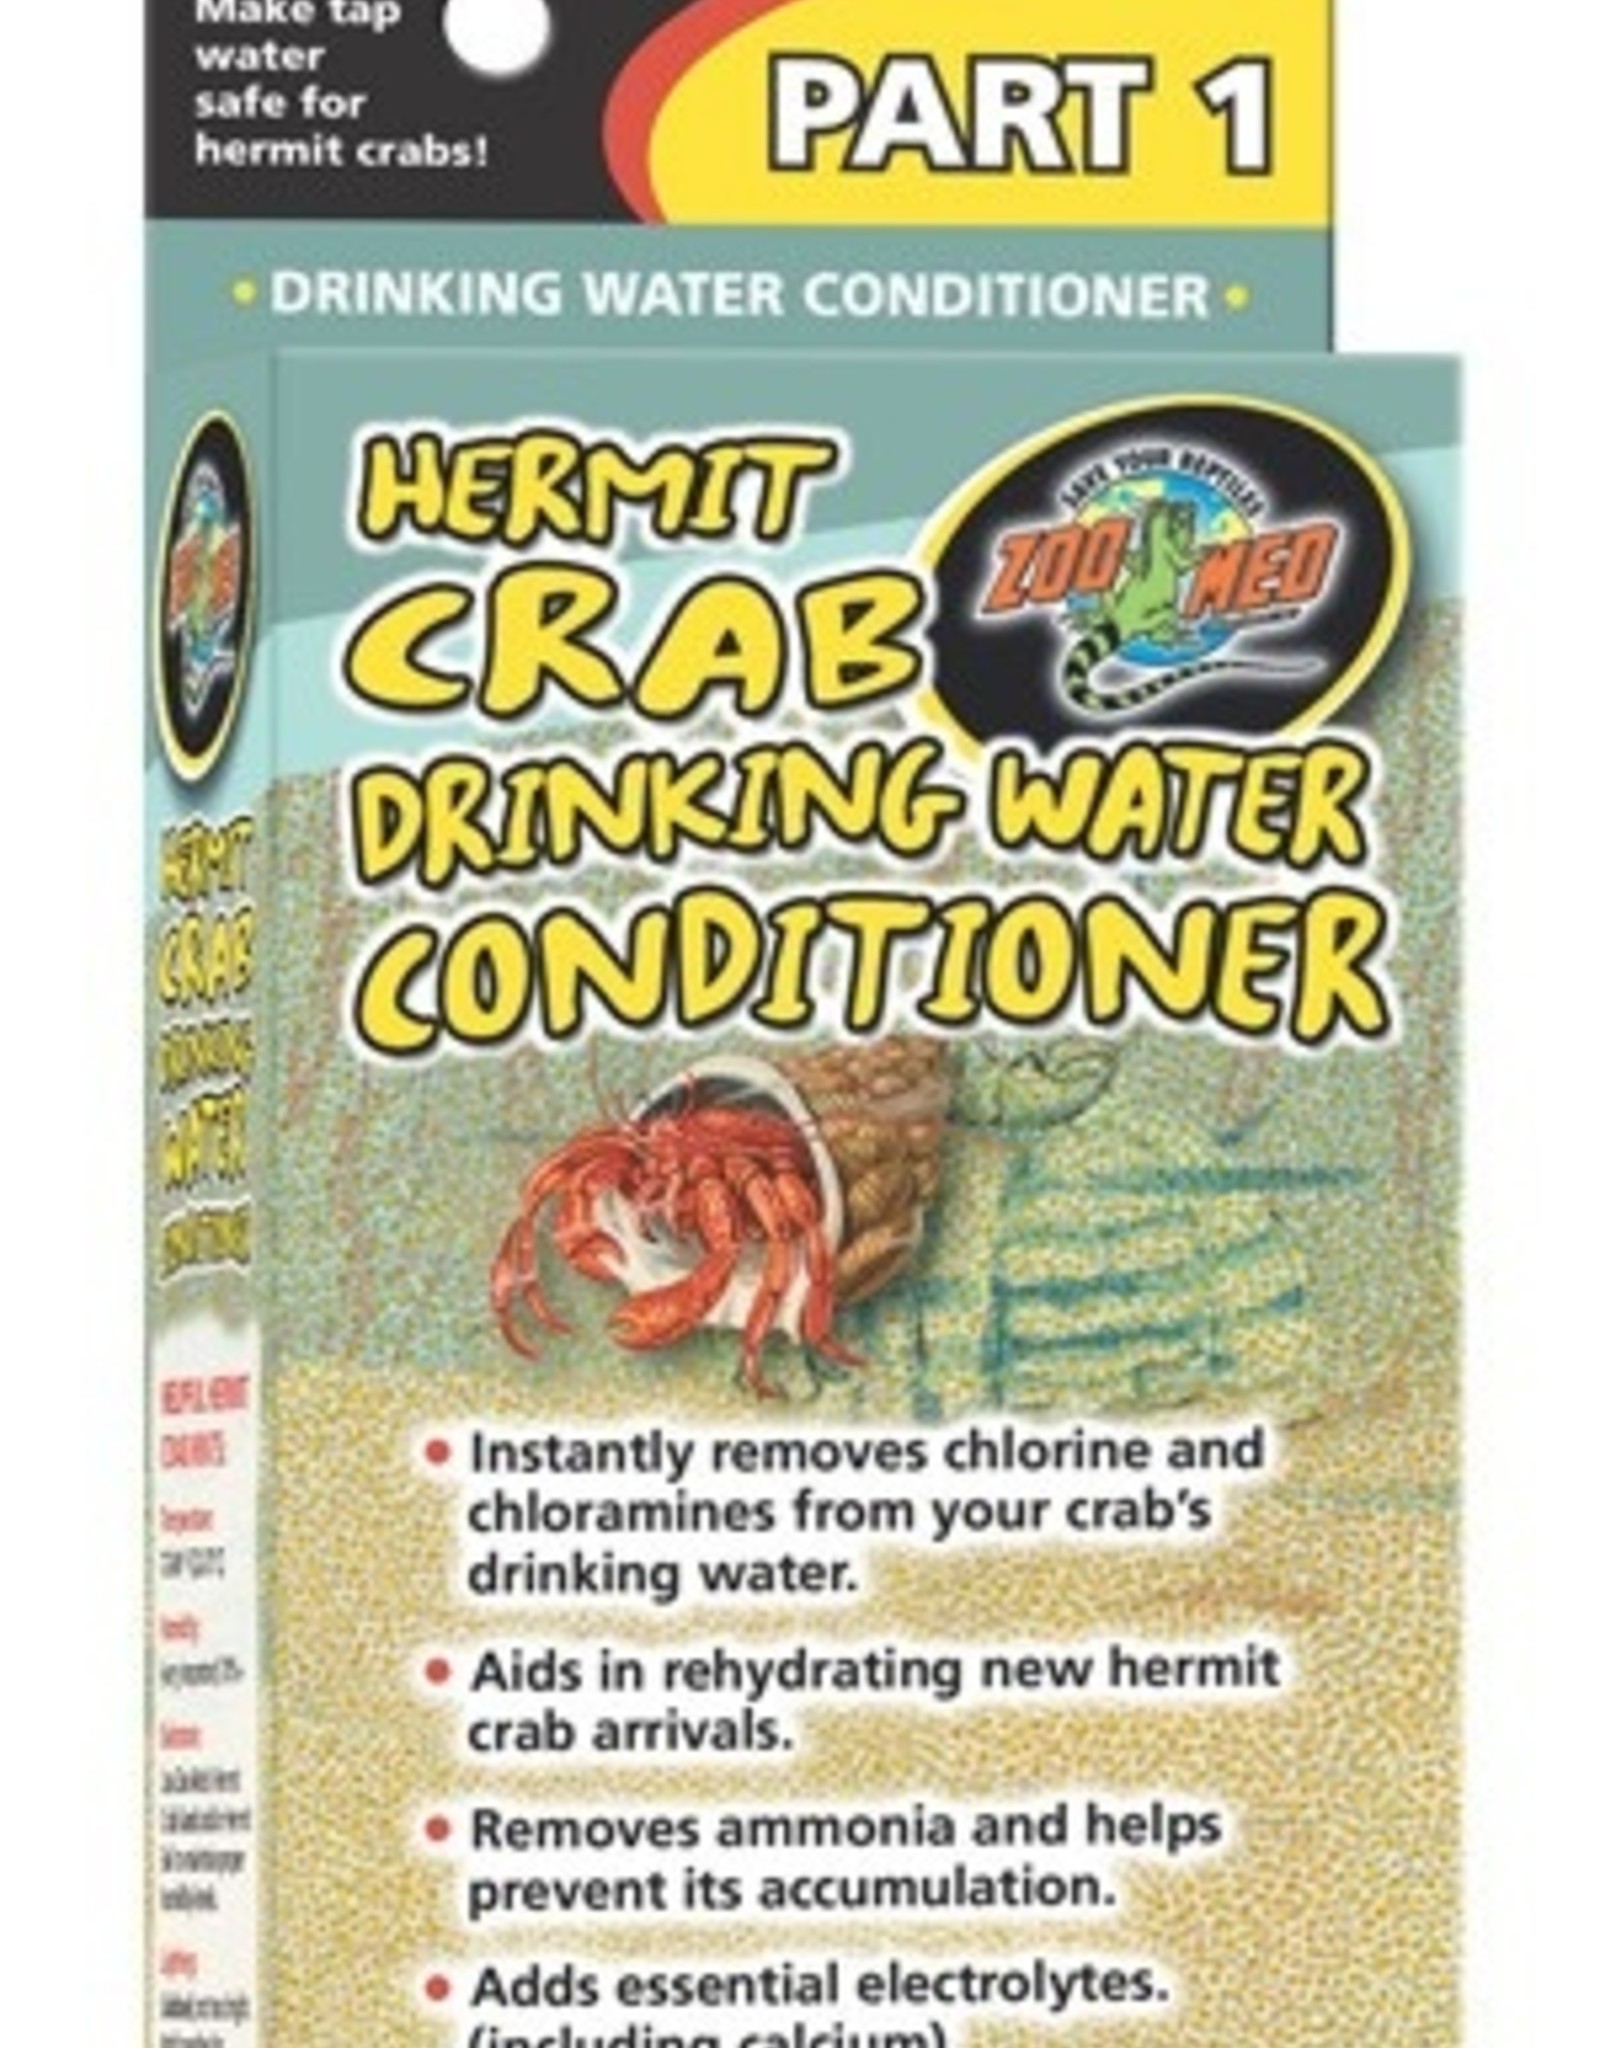 ZOO MED LABS INC ZOOMED HERMIT CRAB DRINKING WATER CONDITIONER (PART 1)